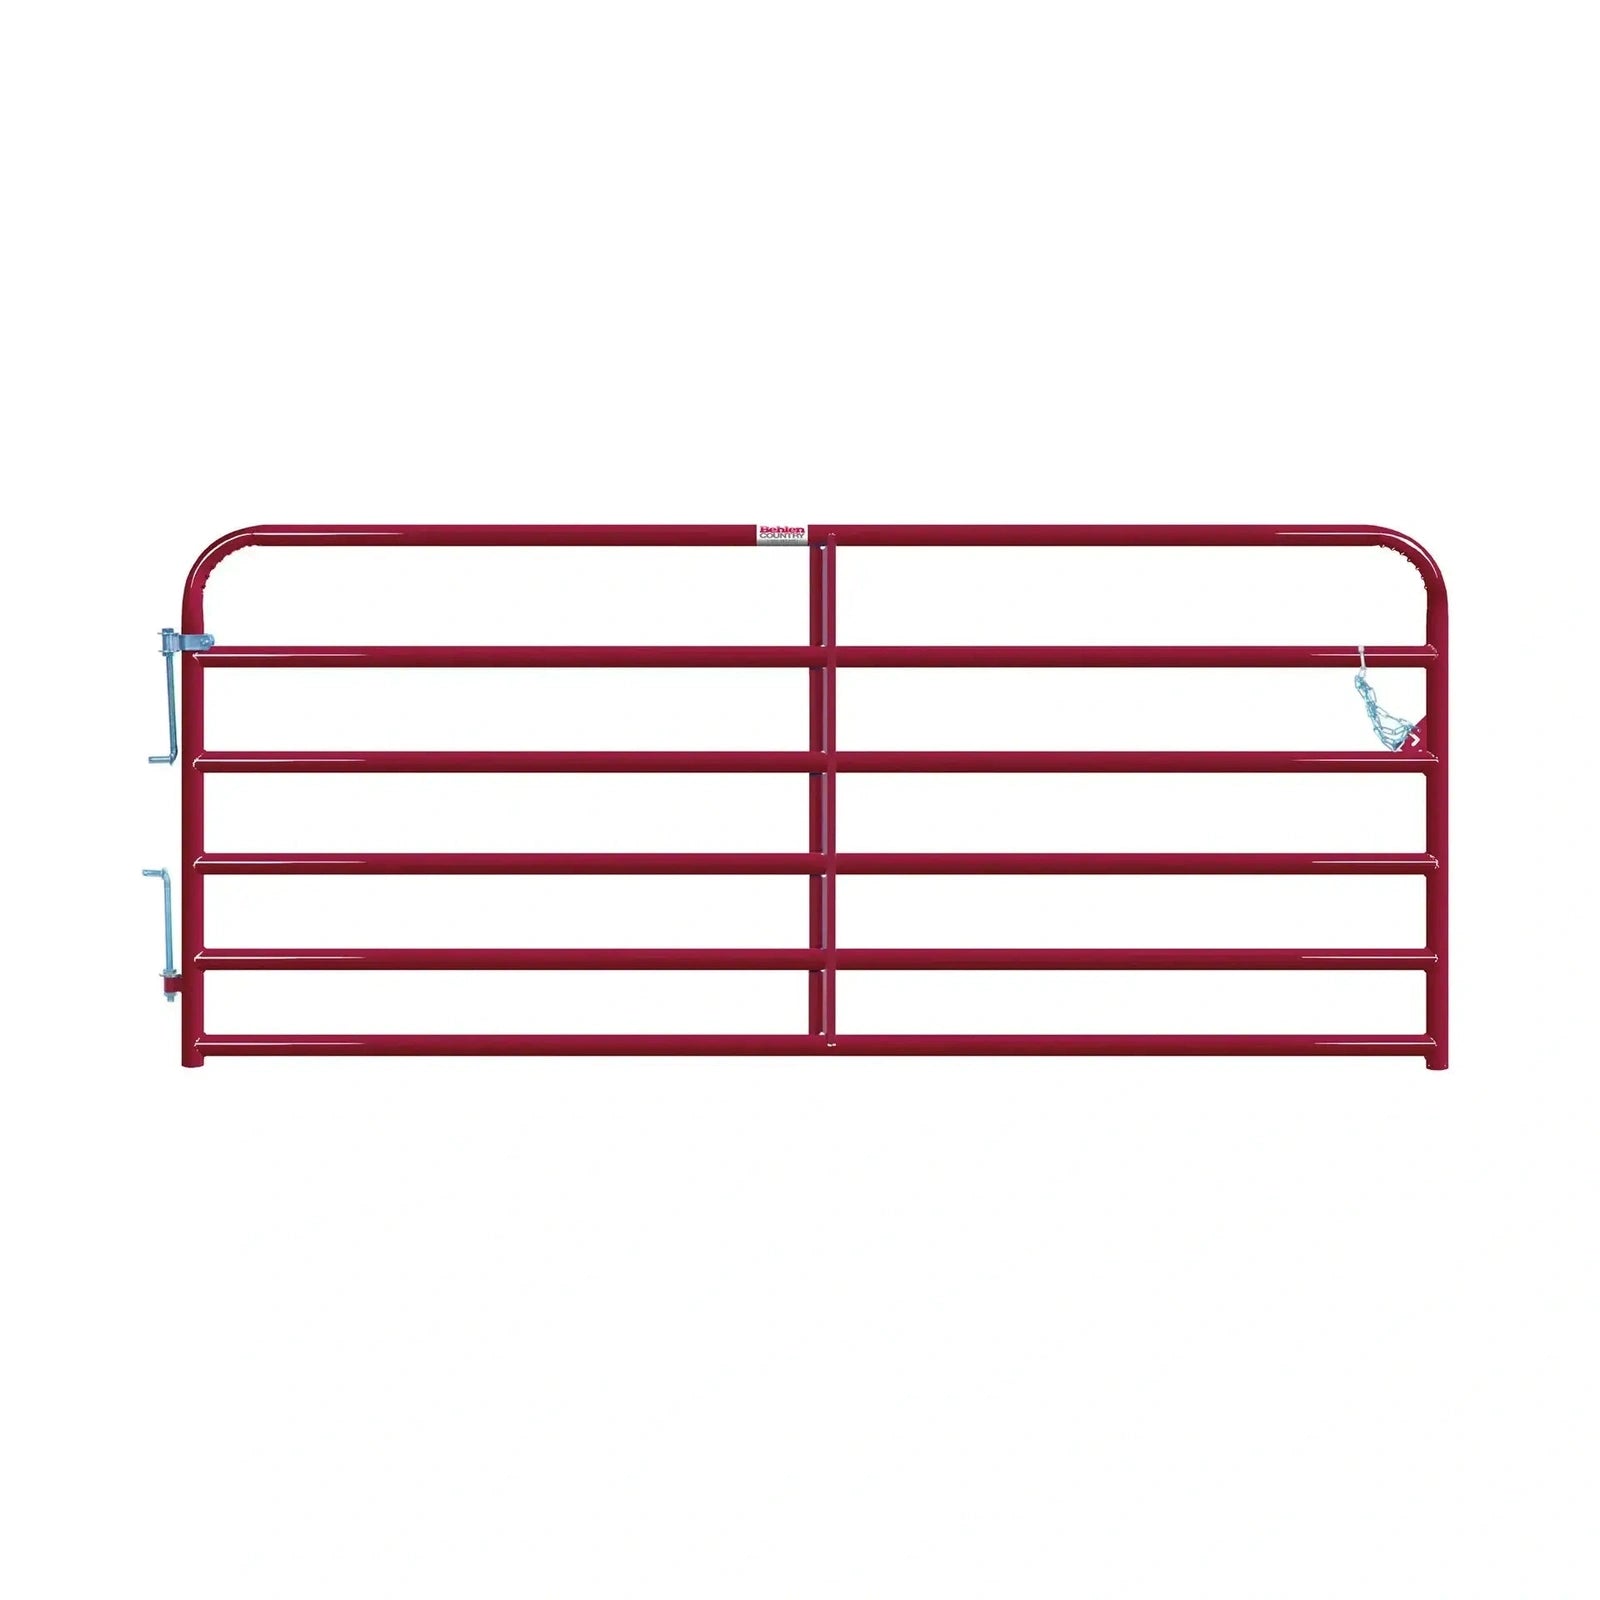 Behlen Country - High Resistance Tubular "Bull" Farm Gate in Painted Steel 